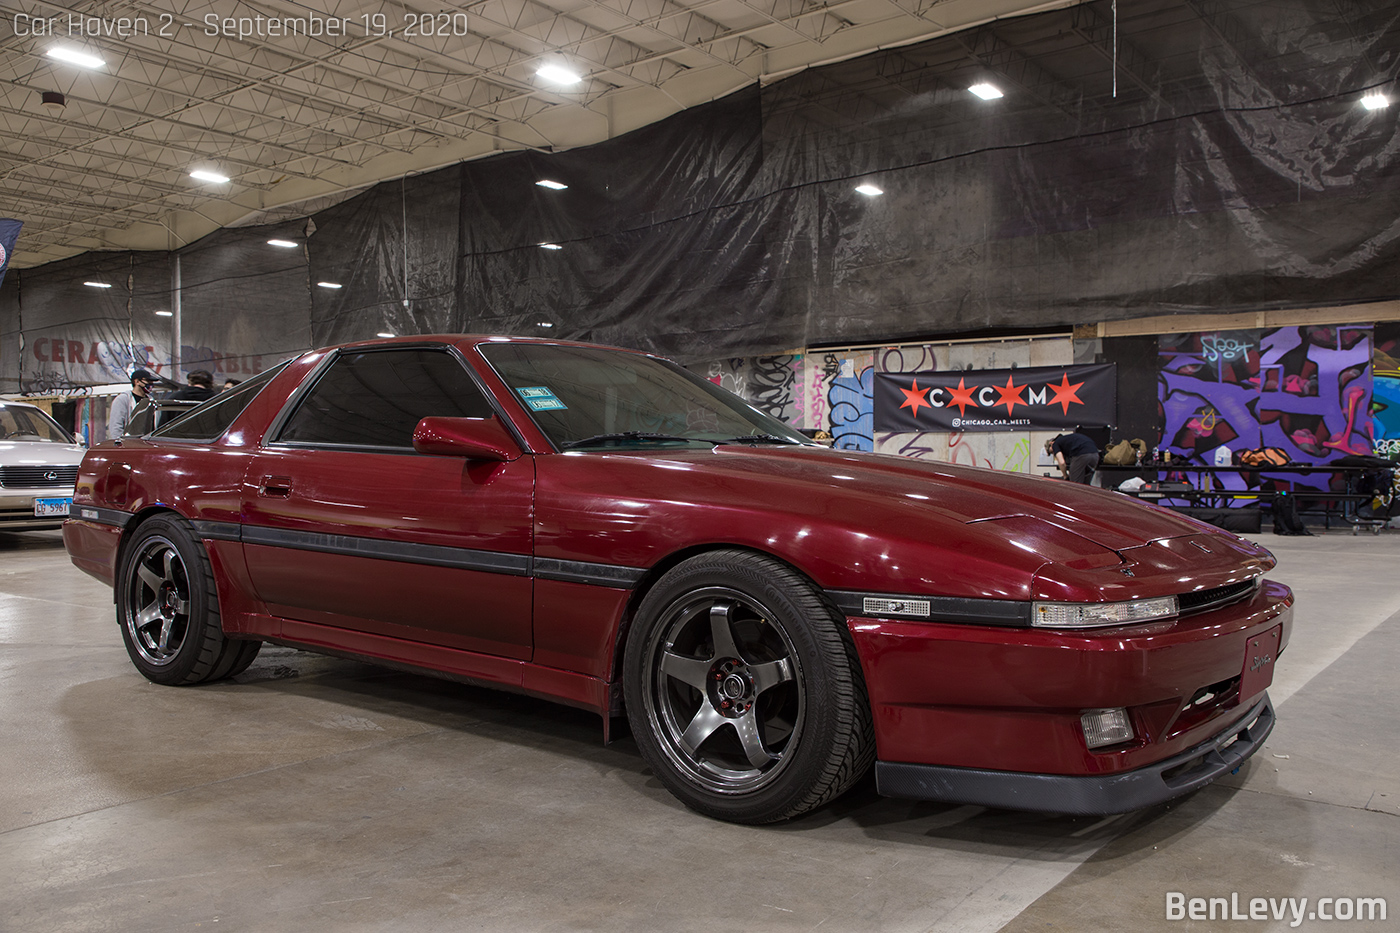 Red Toyota Supra at Car Haven Car Show